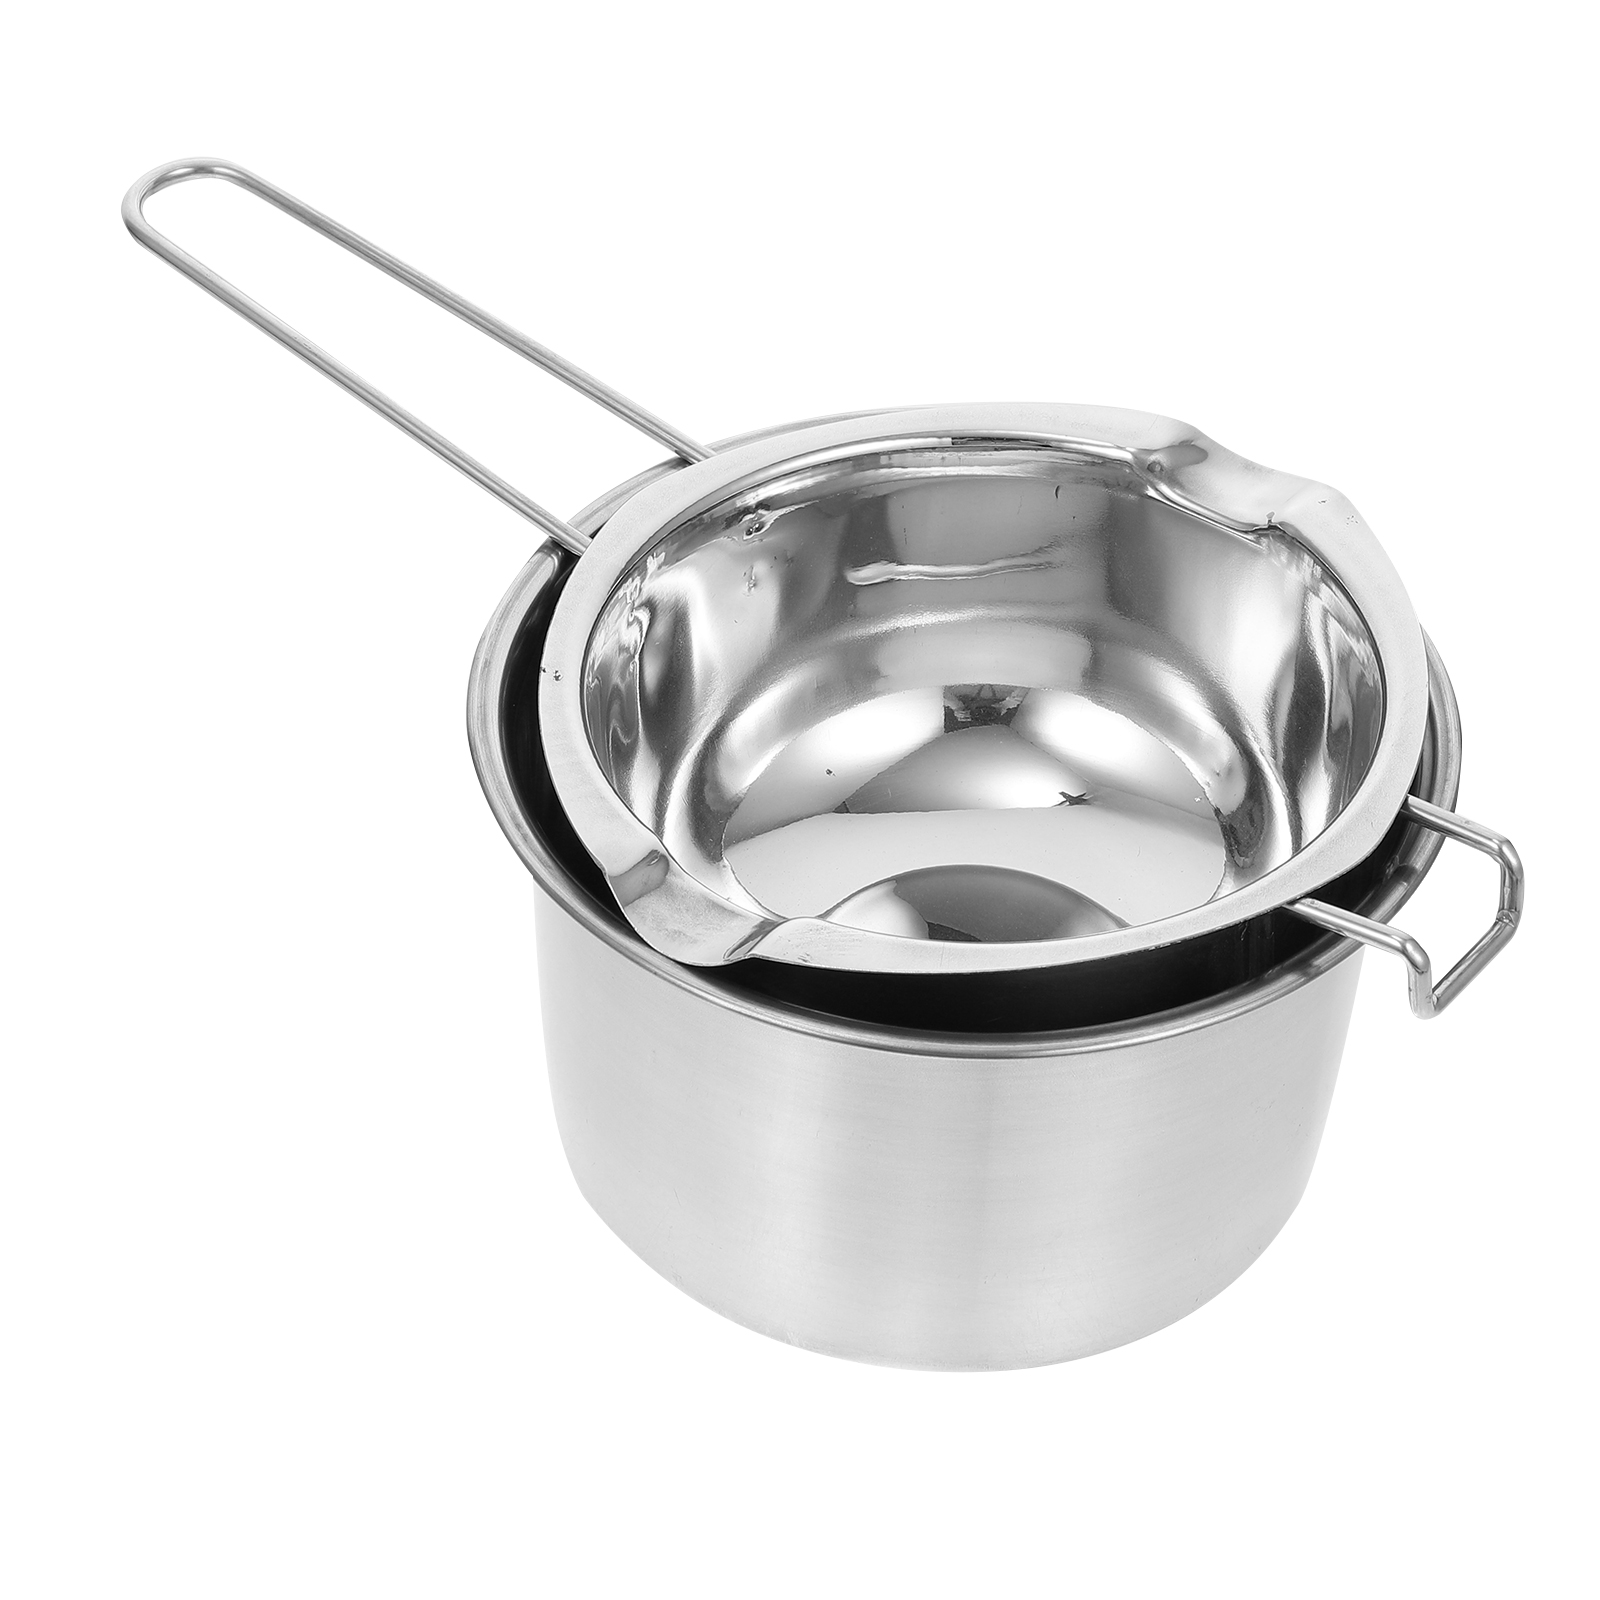 NUOLUX 1 Set Double Boiler Pot Stainless Steel Chocolate Pot Chocolate Melting Pot - image 1 of 6